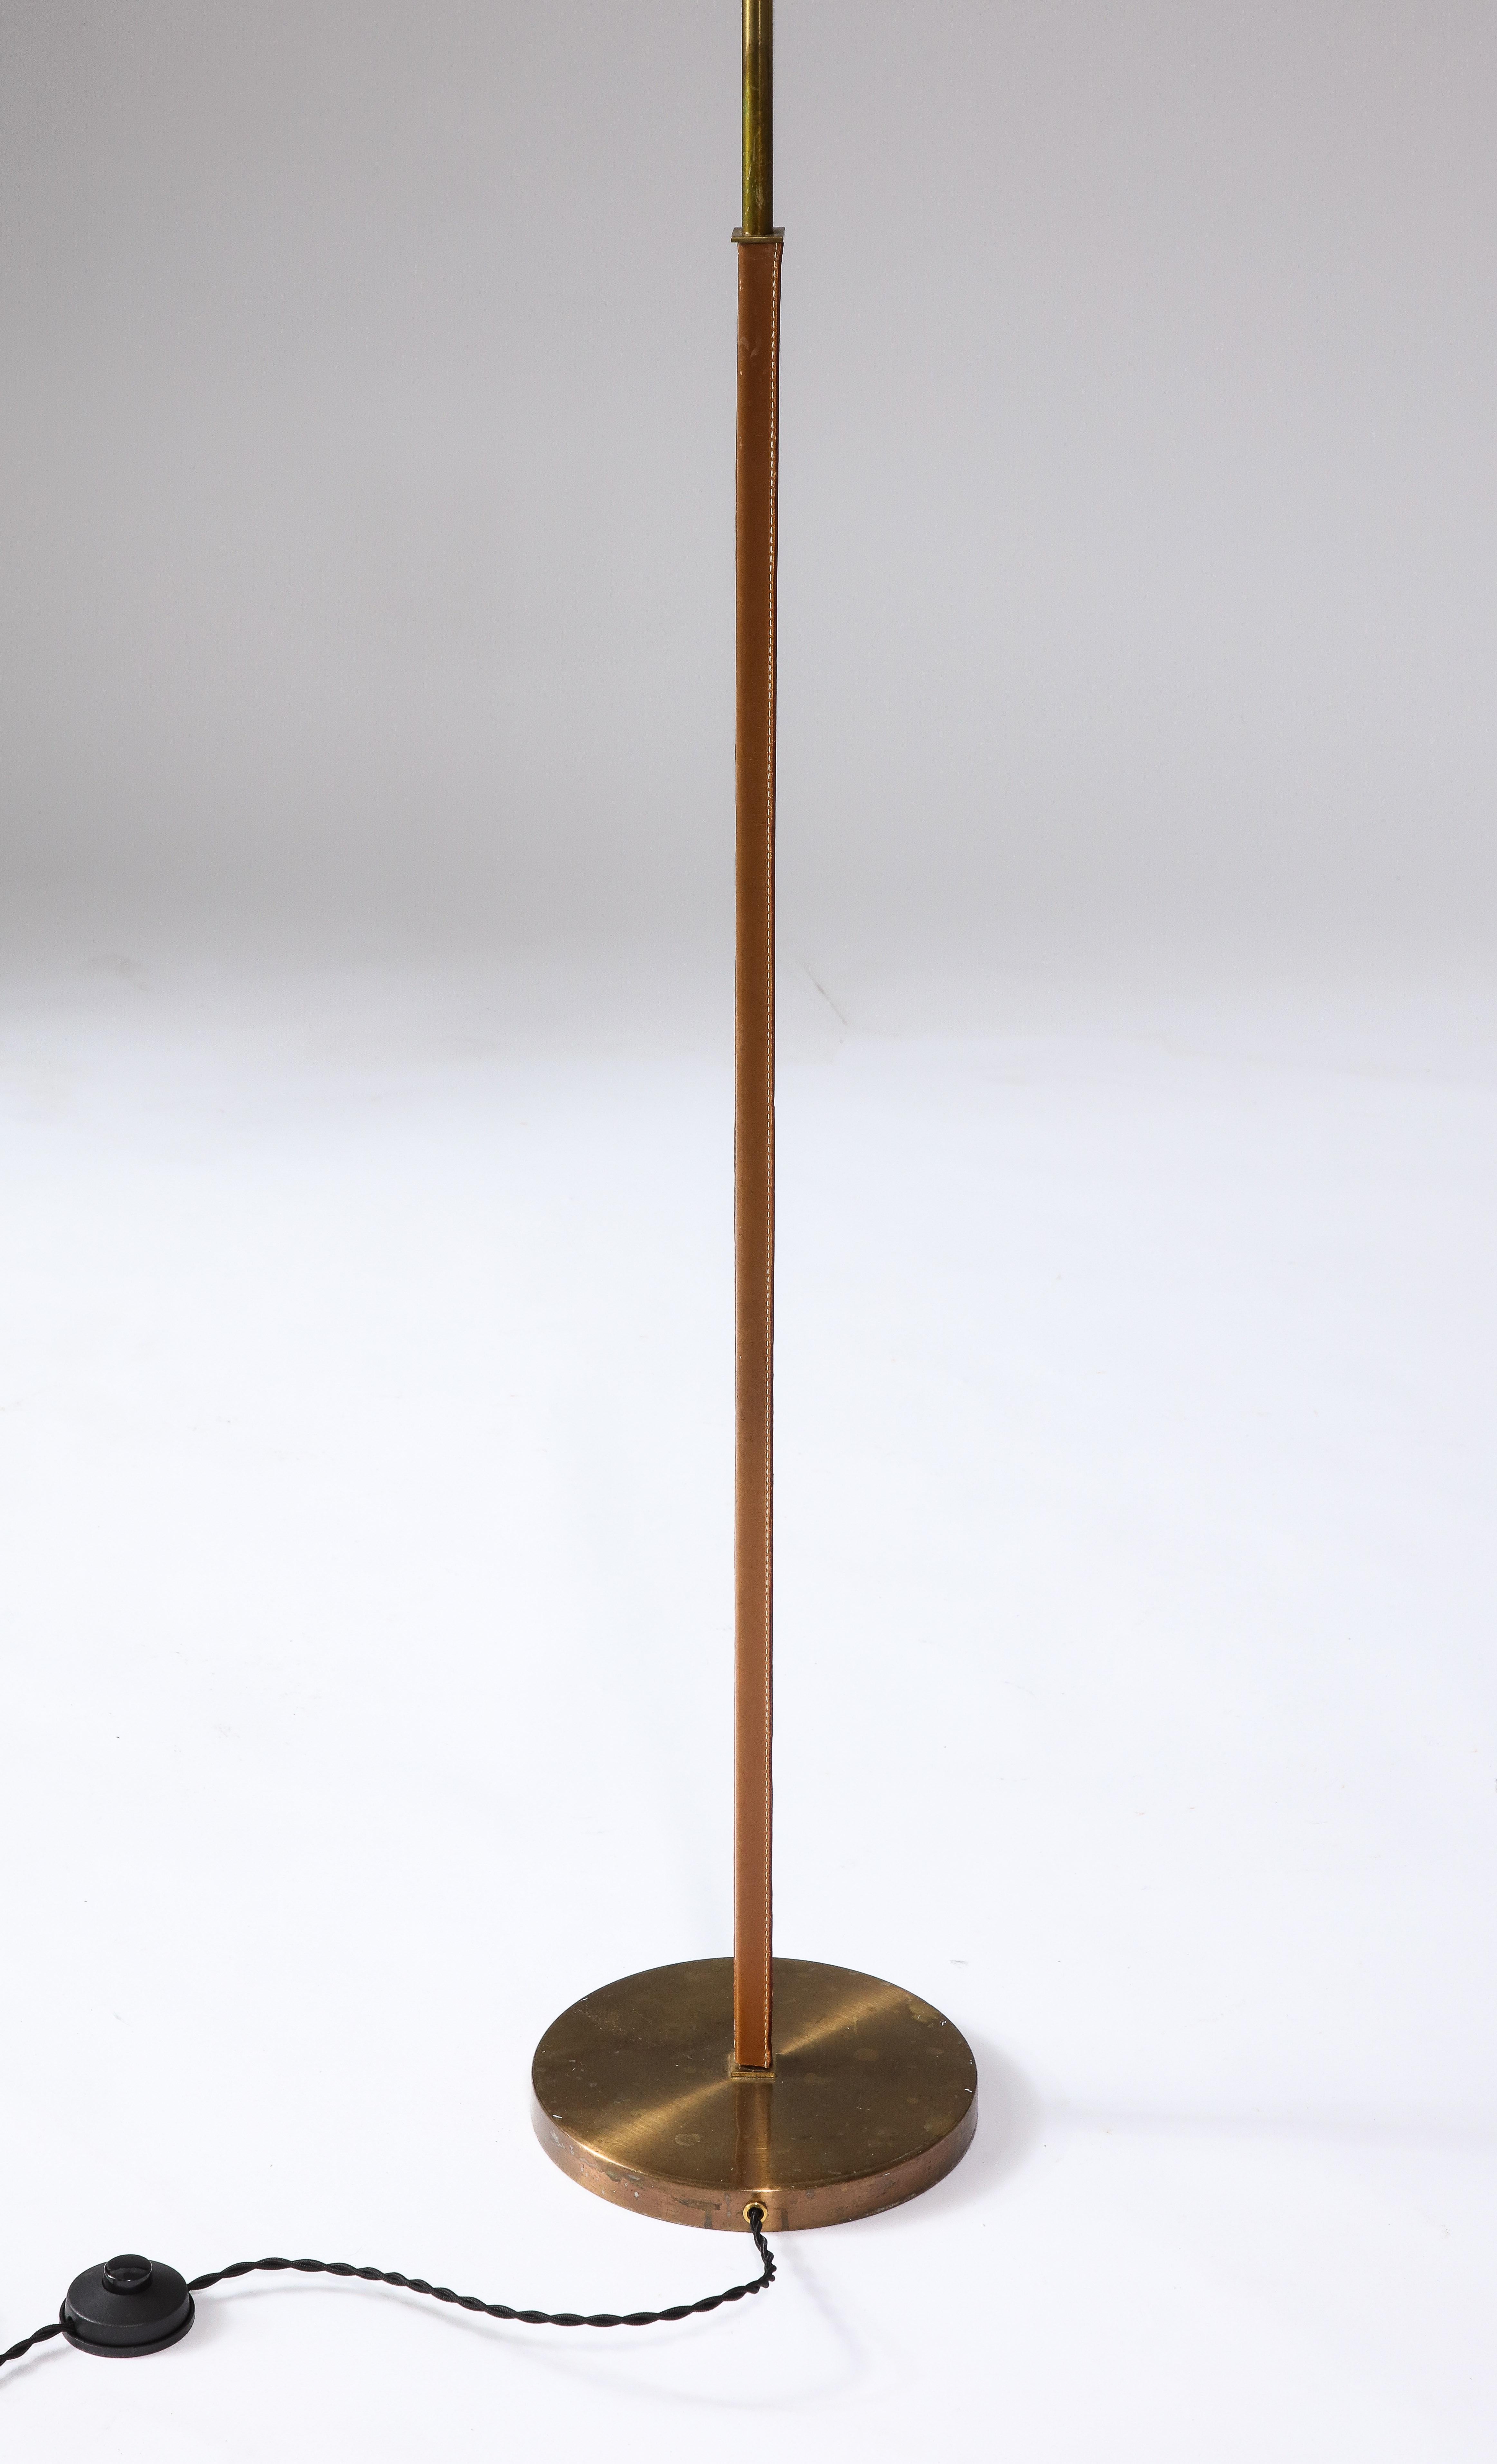 Brass and Leather Floor Lamp by Falkenbergs Belysning, Sweden, c. 1950 For Sale 2